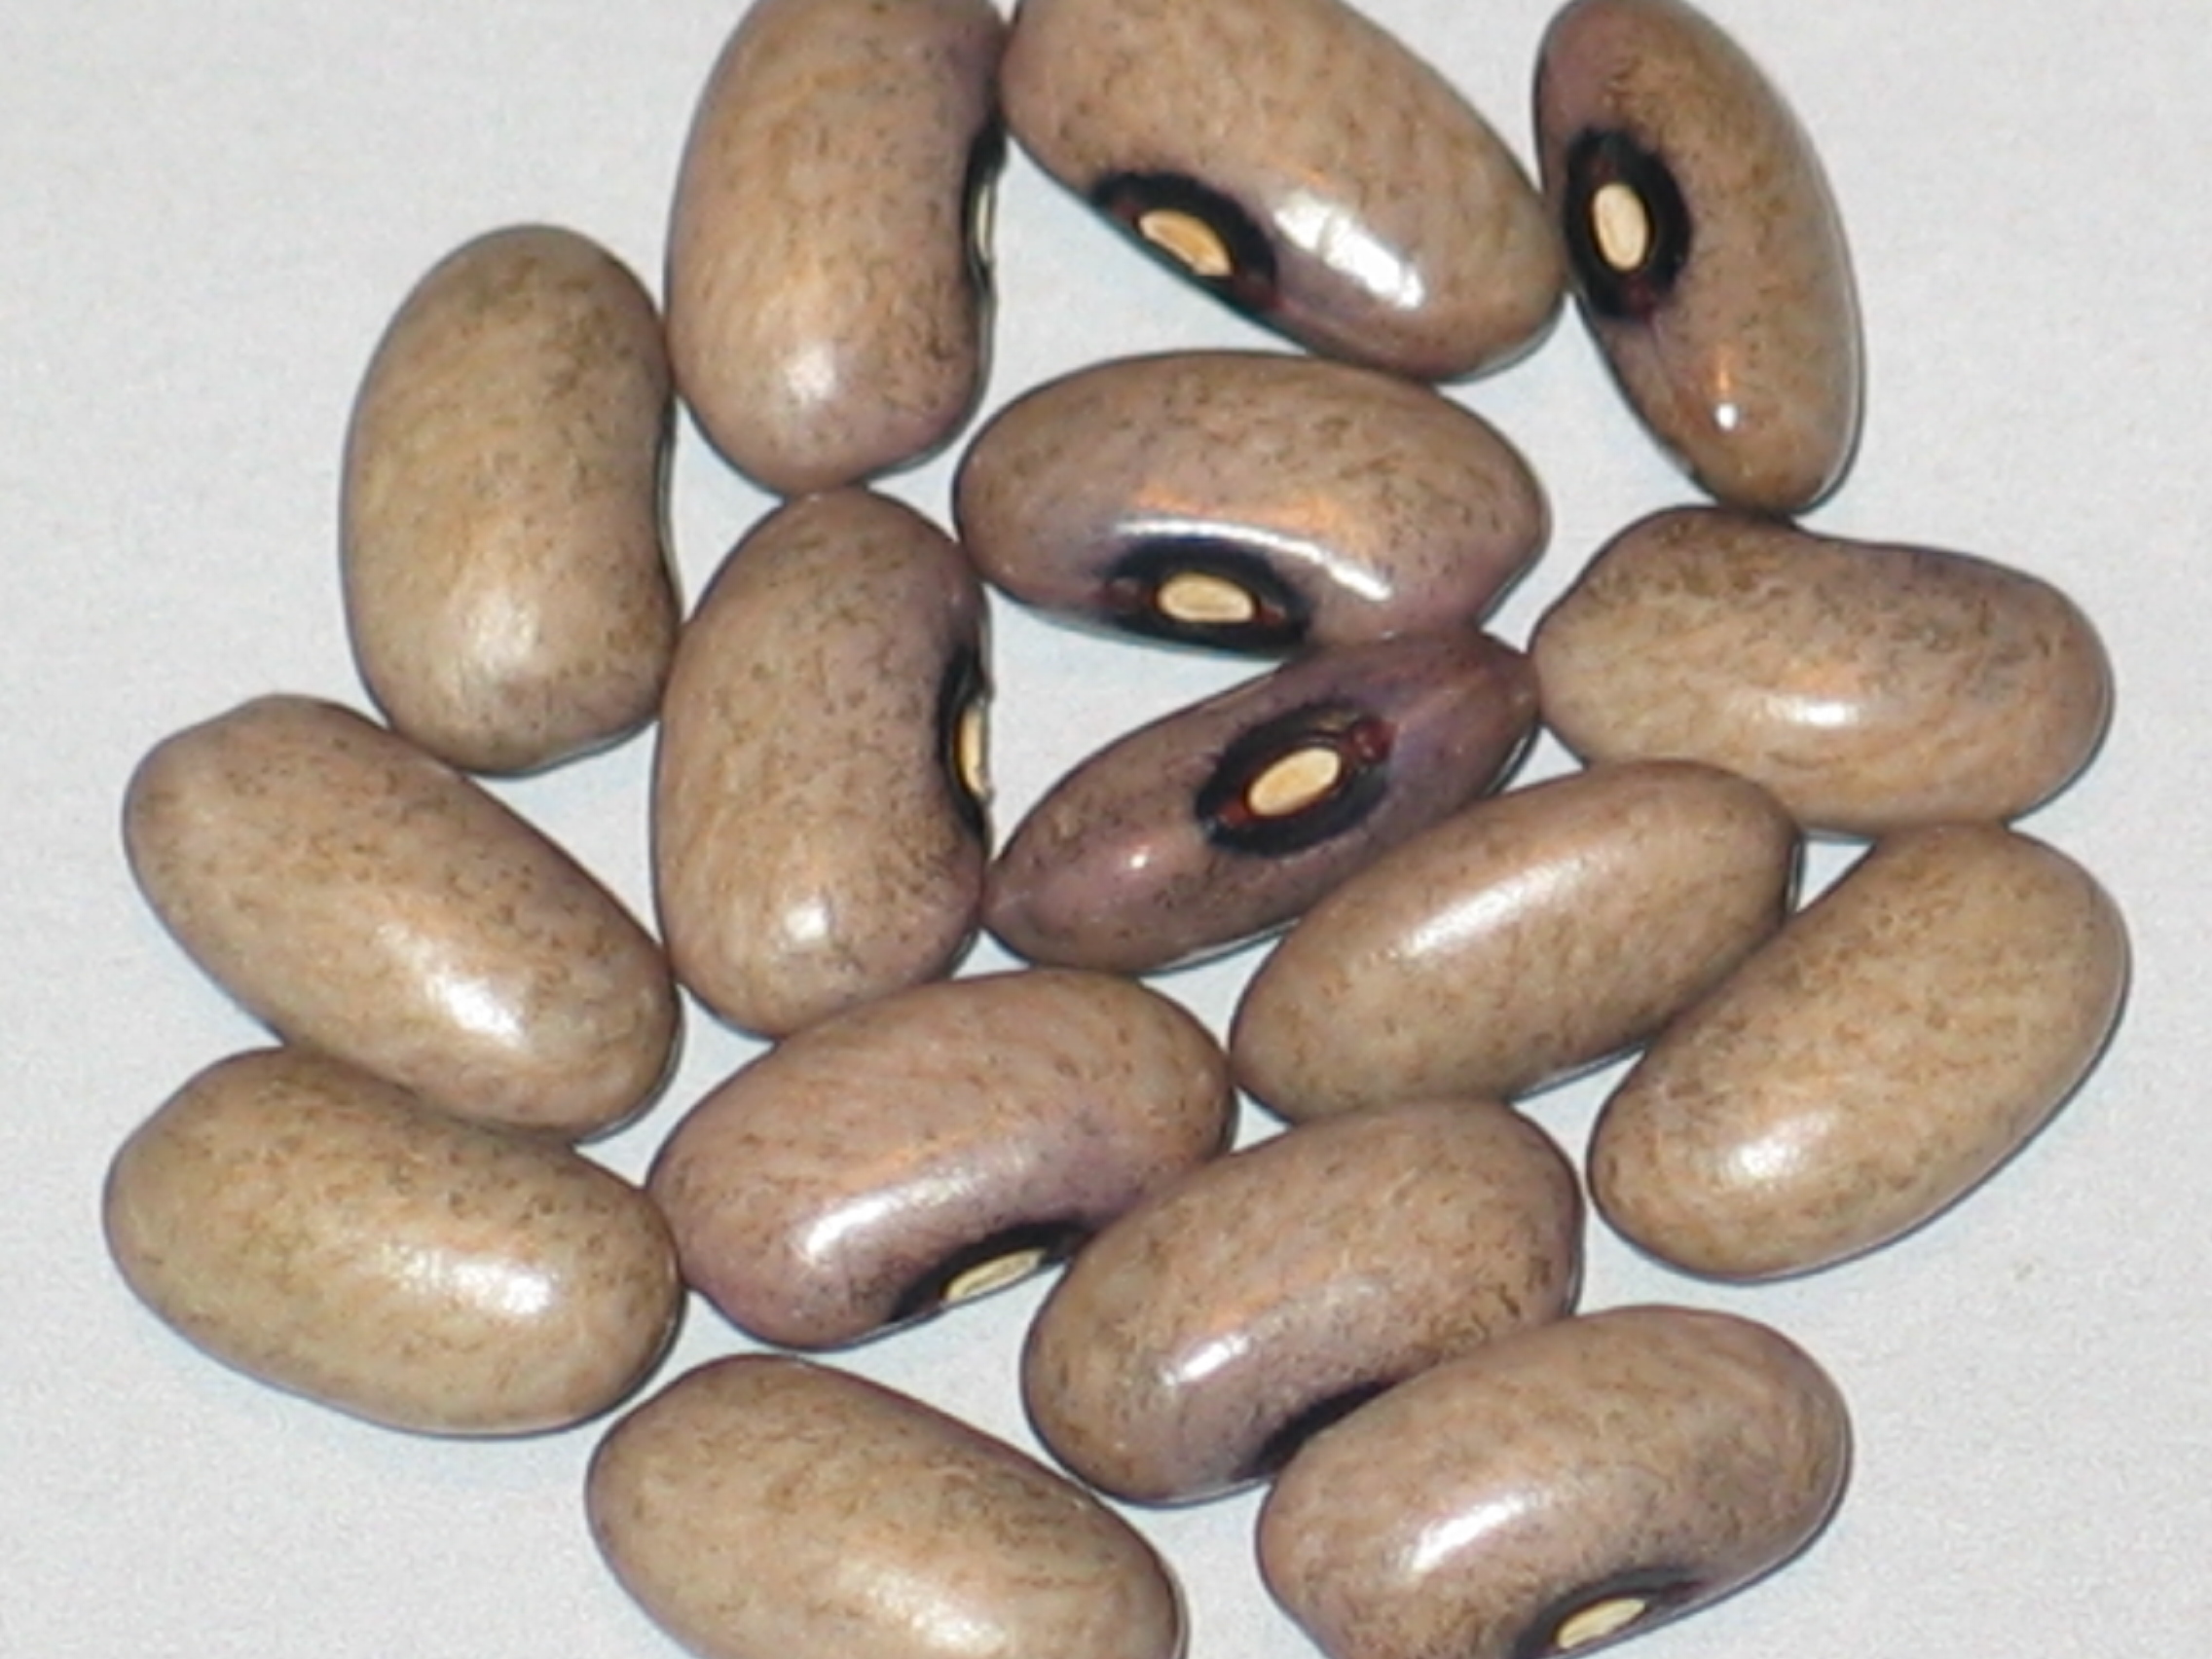 image of Green Savage beans